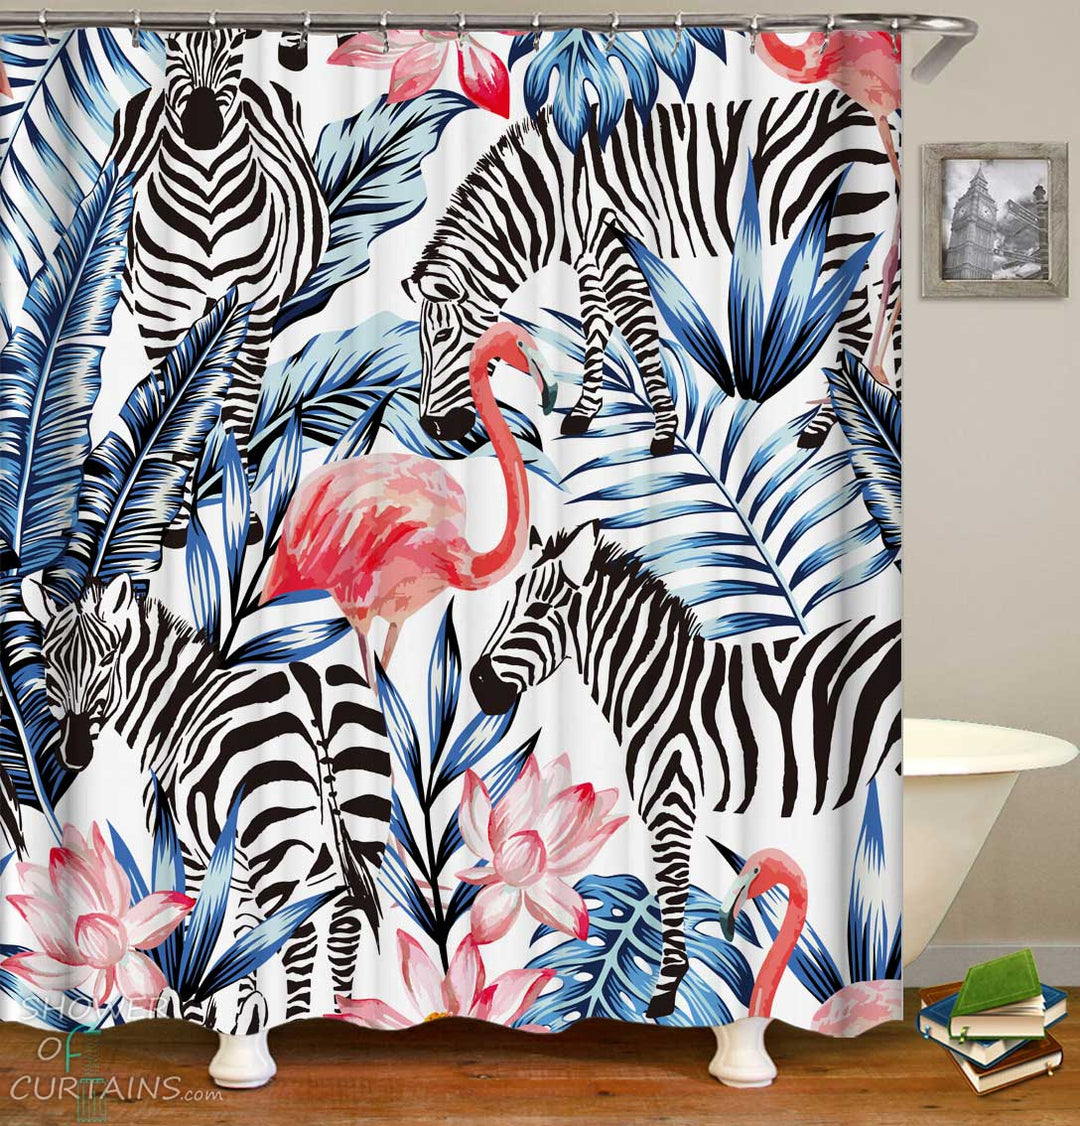 Shower Curtains with Tropical Vibes Flamingos and Zebra